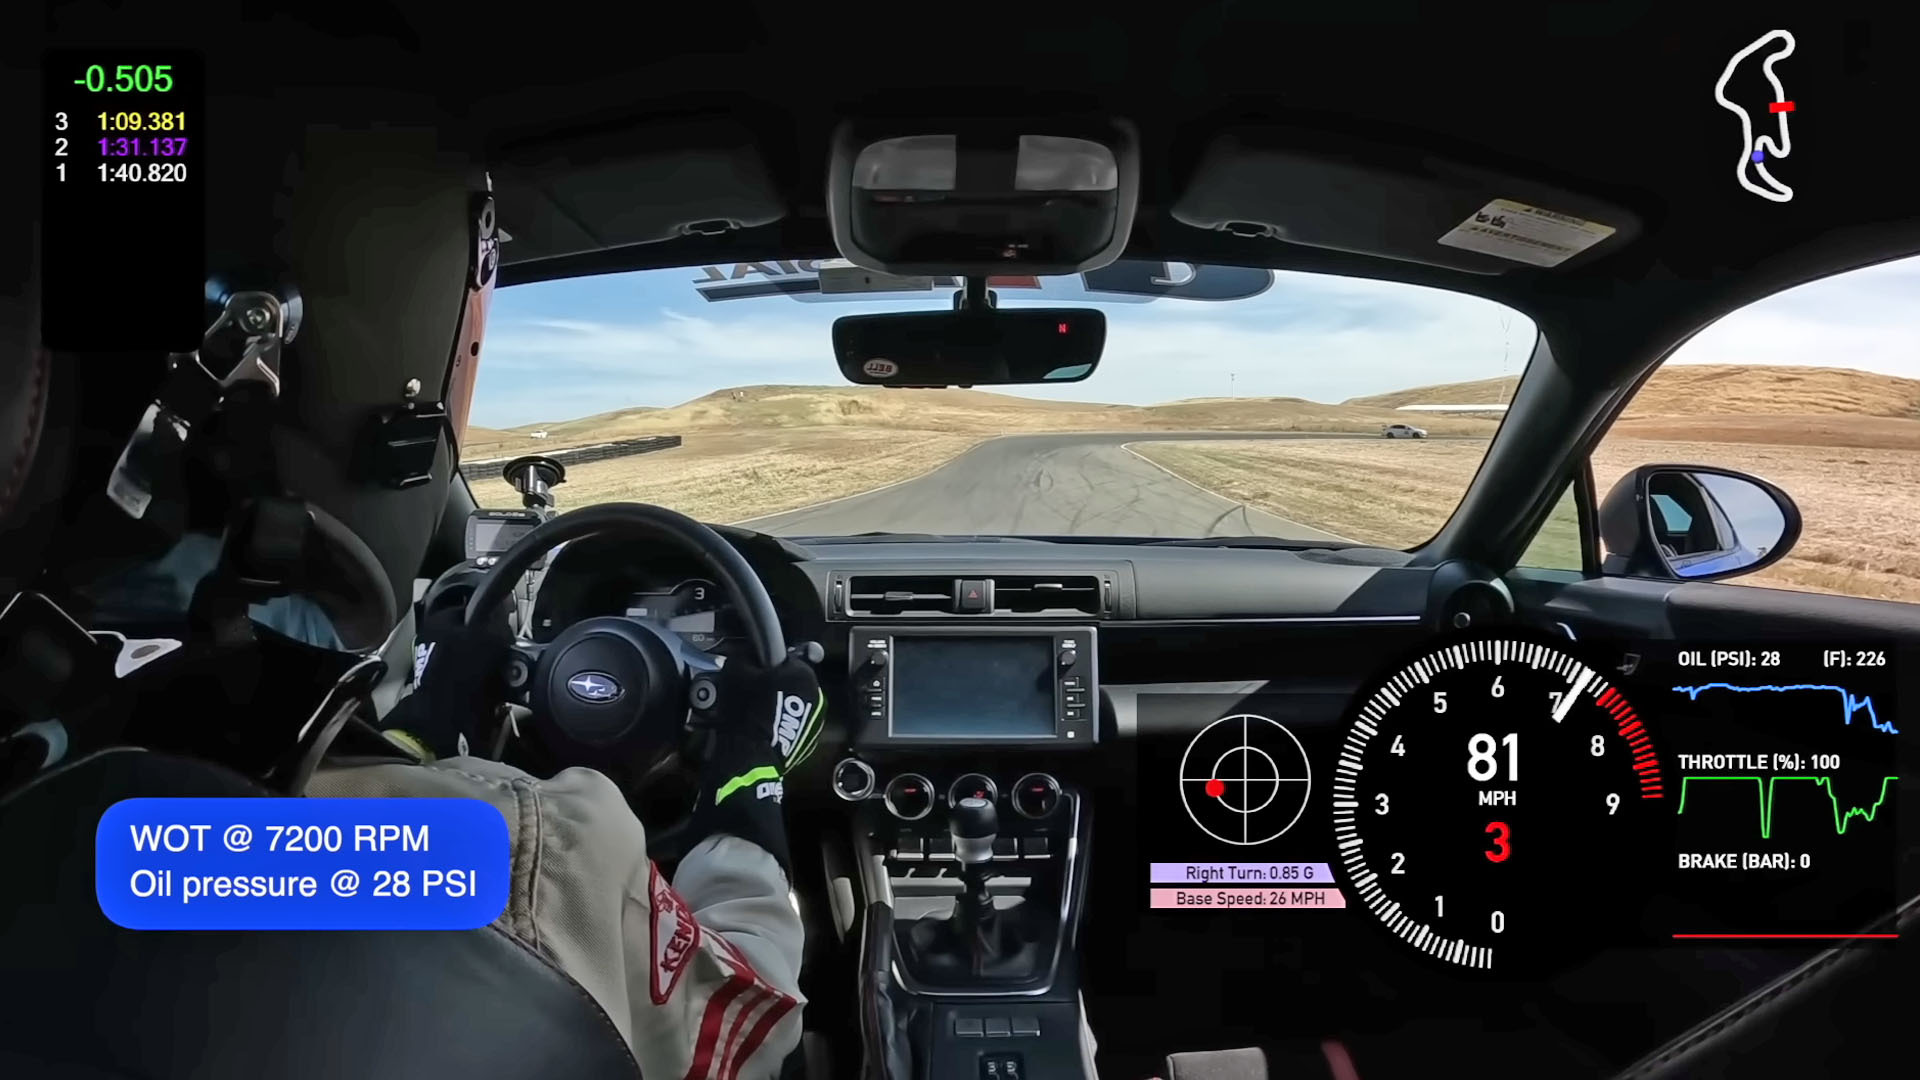 2022 Subaru BRZ Owner’s Instrumented Testing Shows Big Oil Pressure Drops On Track